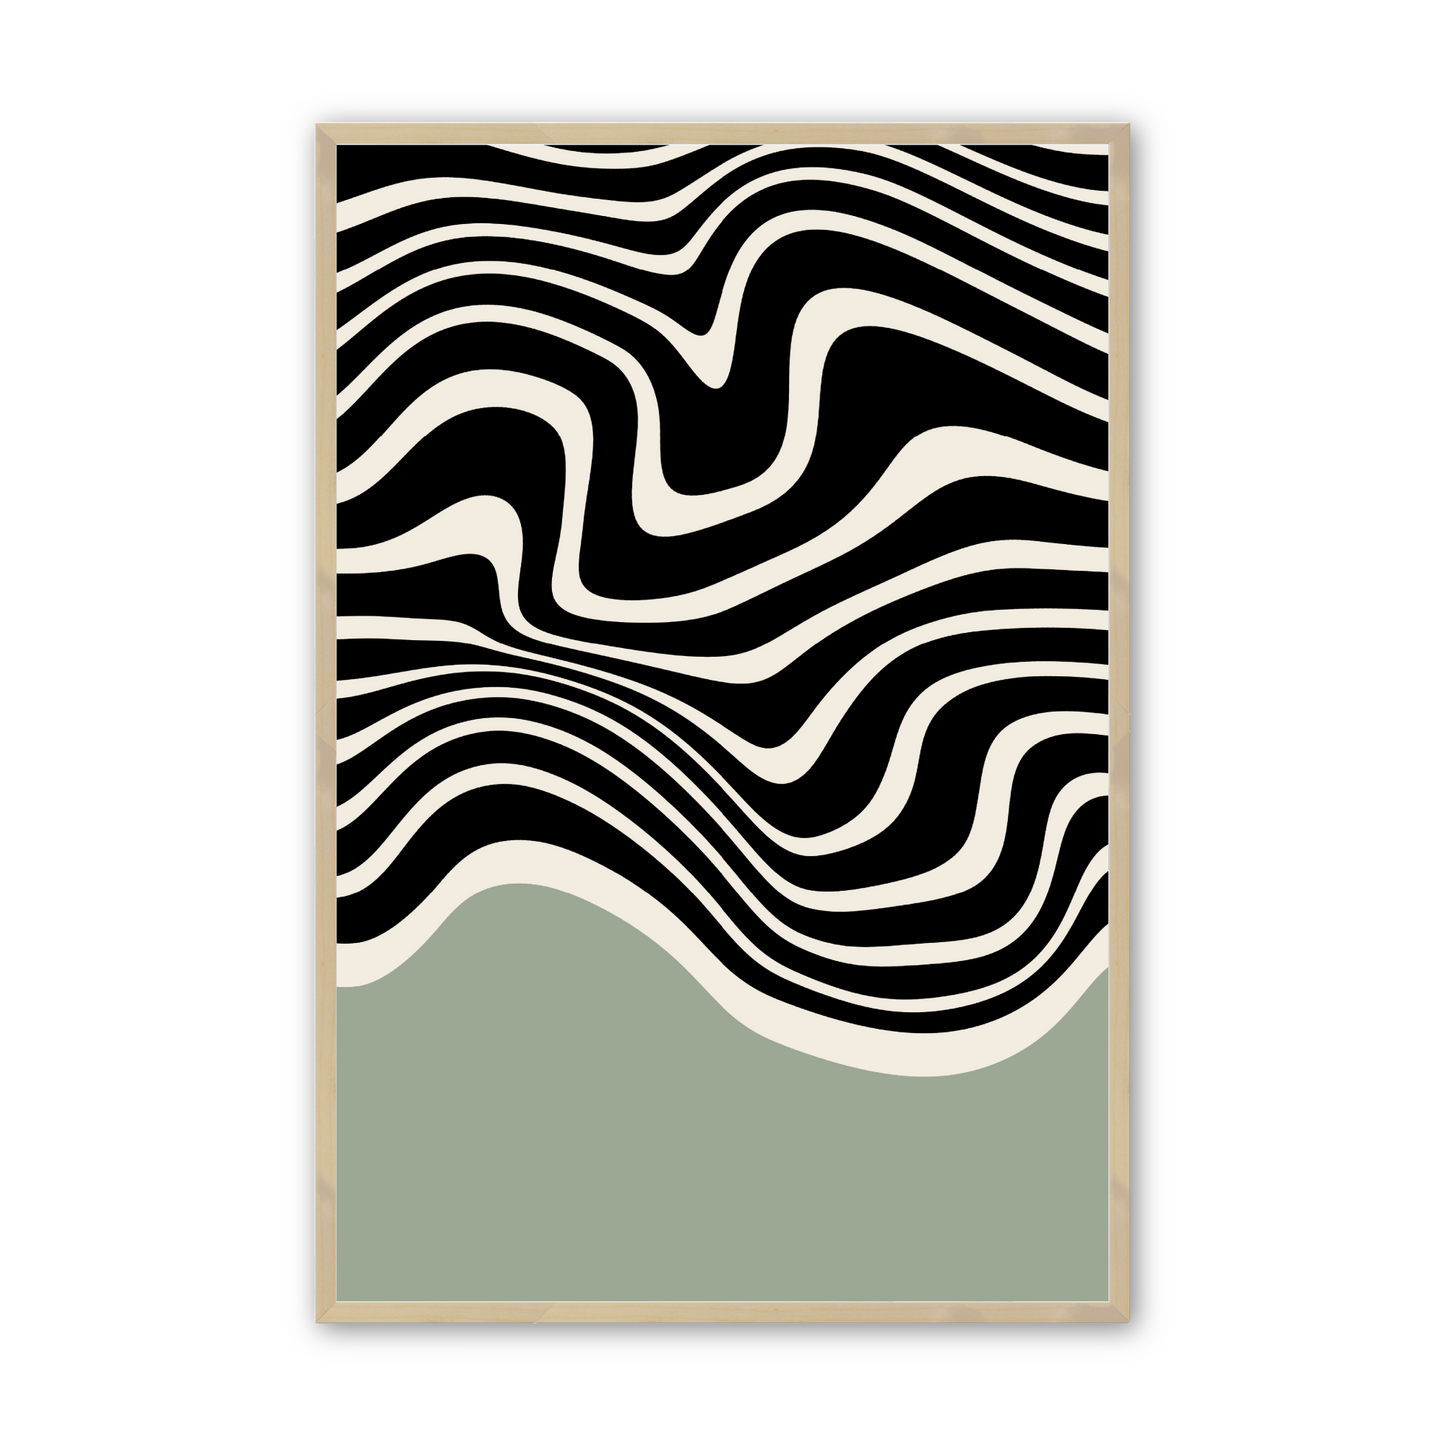 [color:Satin Black], Picture of the second of 4 Abstract illustrations in a black frame